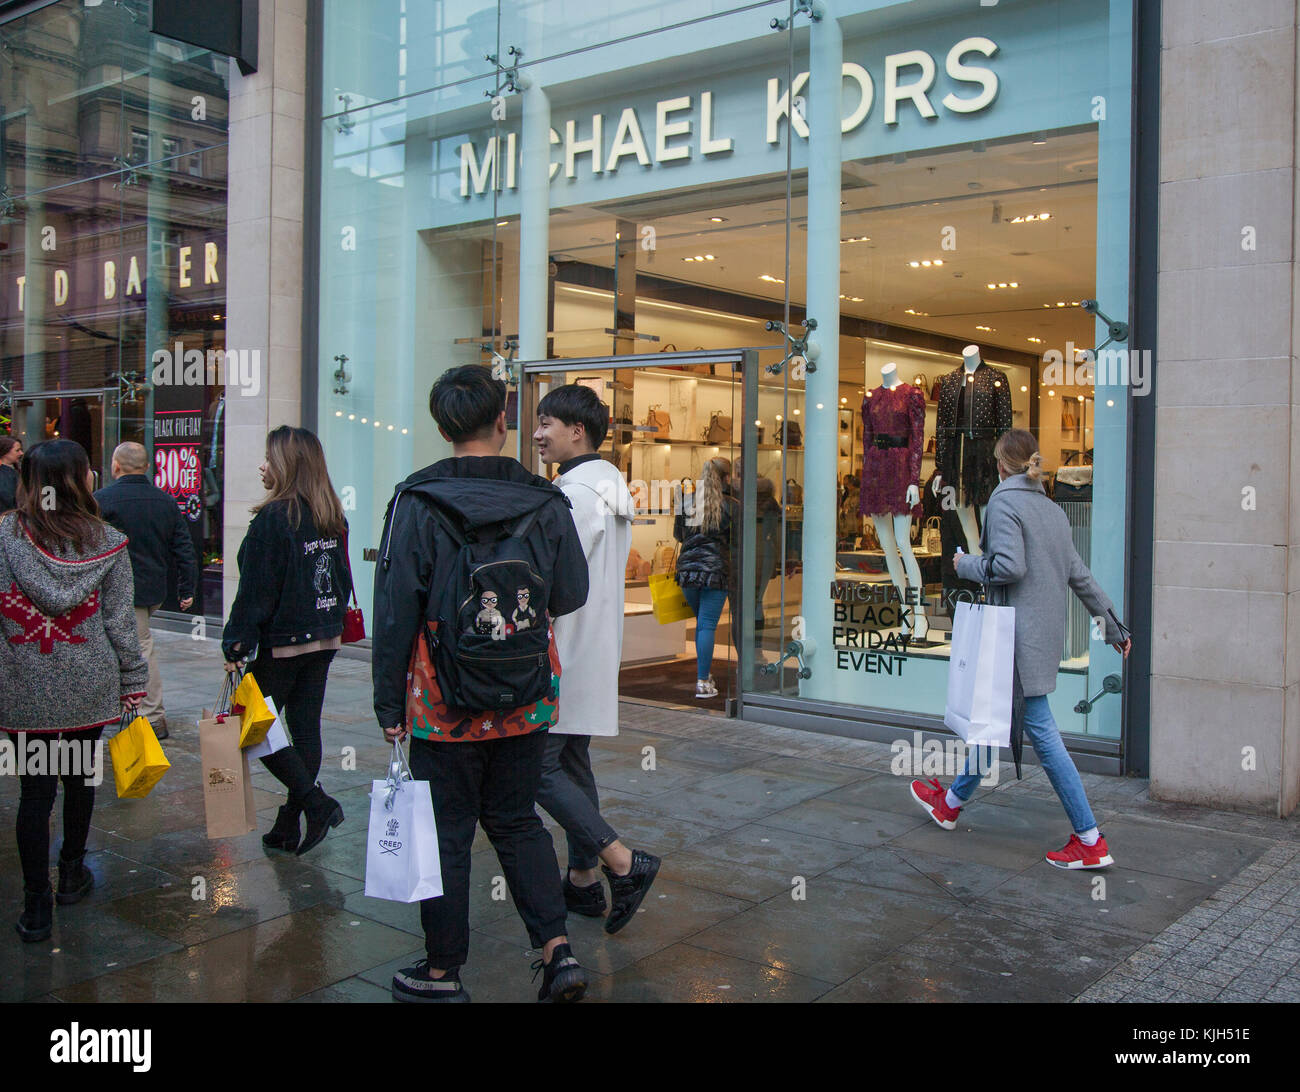 PRAGUE, CZECH REPUBLIC - CIRCA DECEMBER 2017: Store Front Of Michael Kors  Brand Store Stock Photo, Picture and Royalty Free Image. Image 93038312.